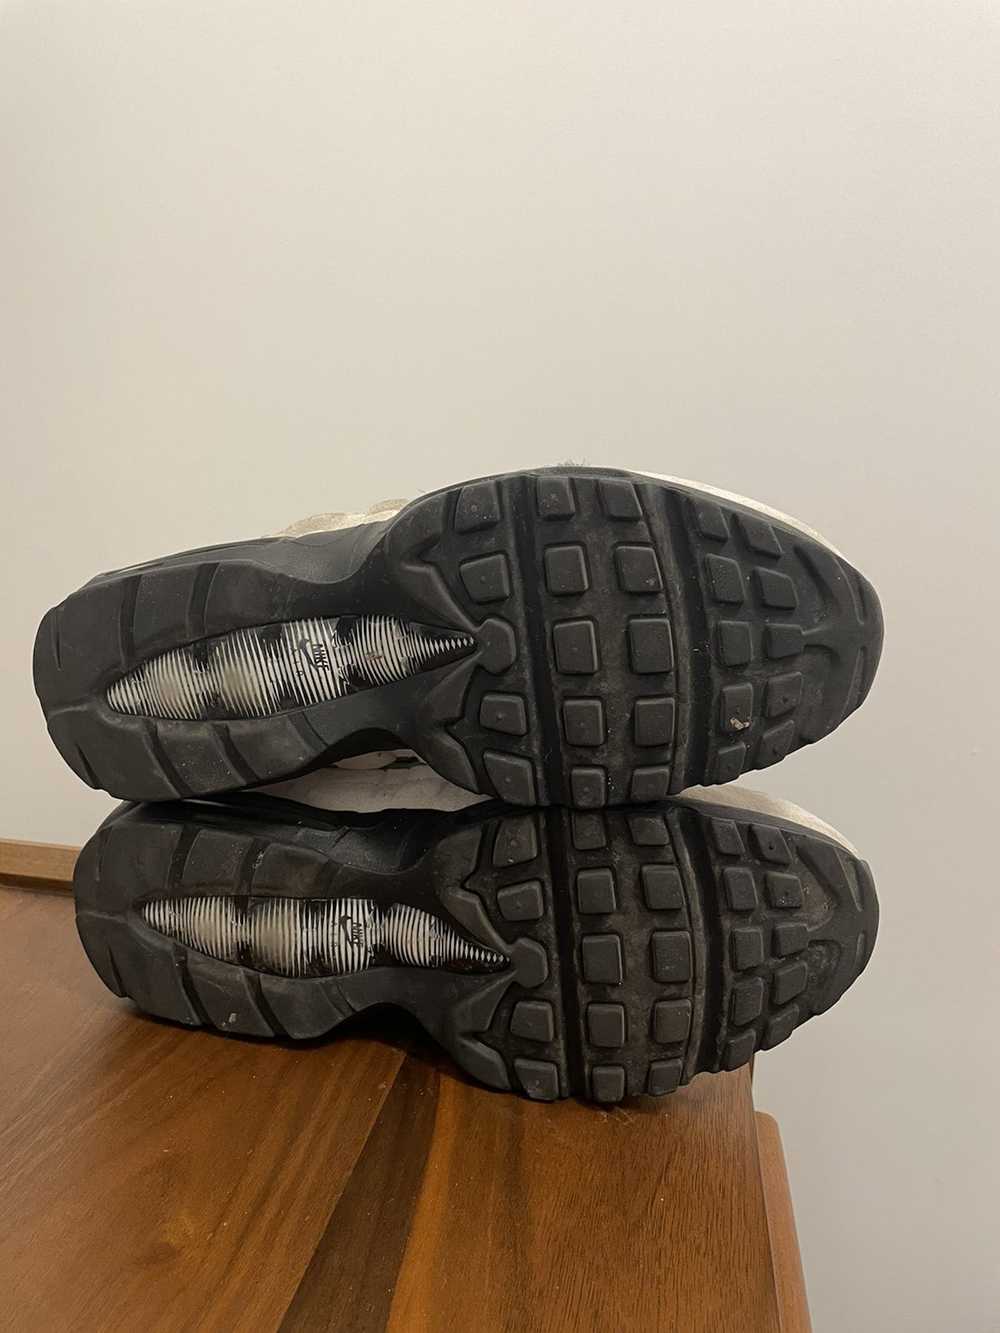 Comme des Garcons × Nike CDG Air Max 95 Charcoal - image 6